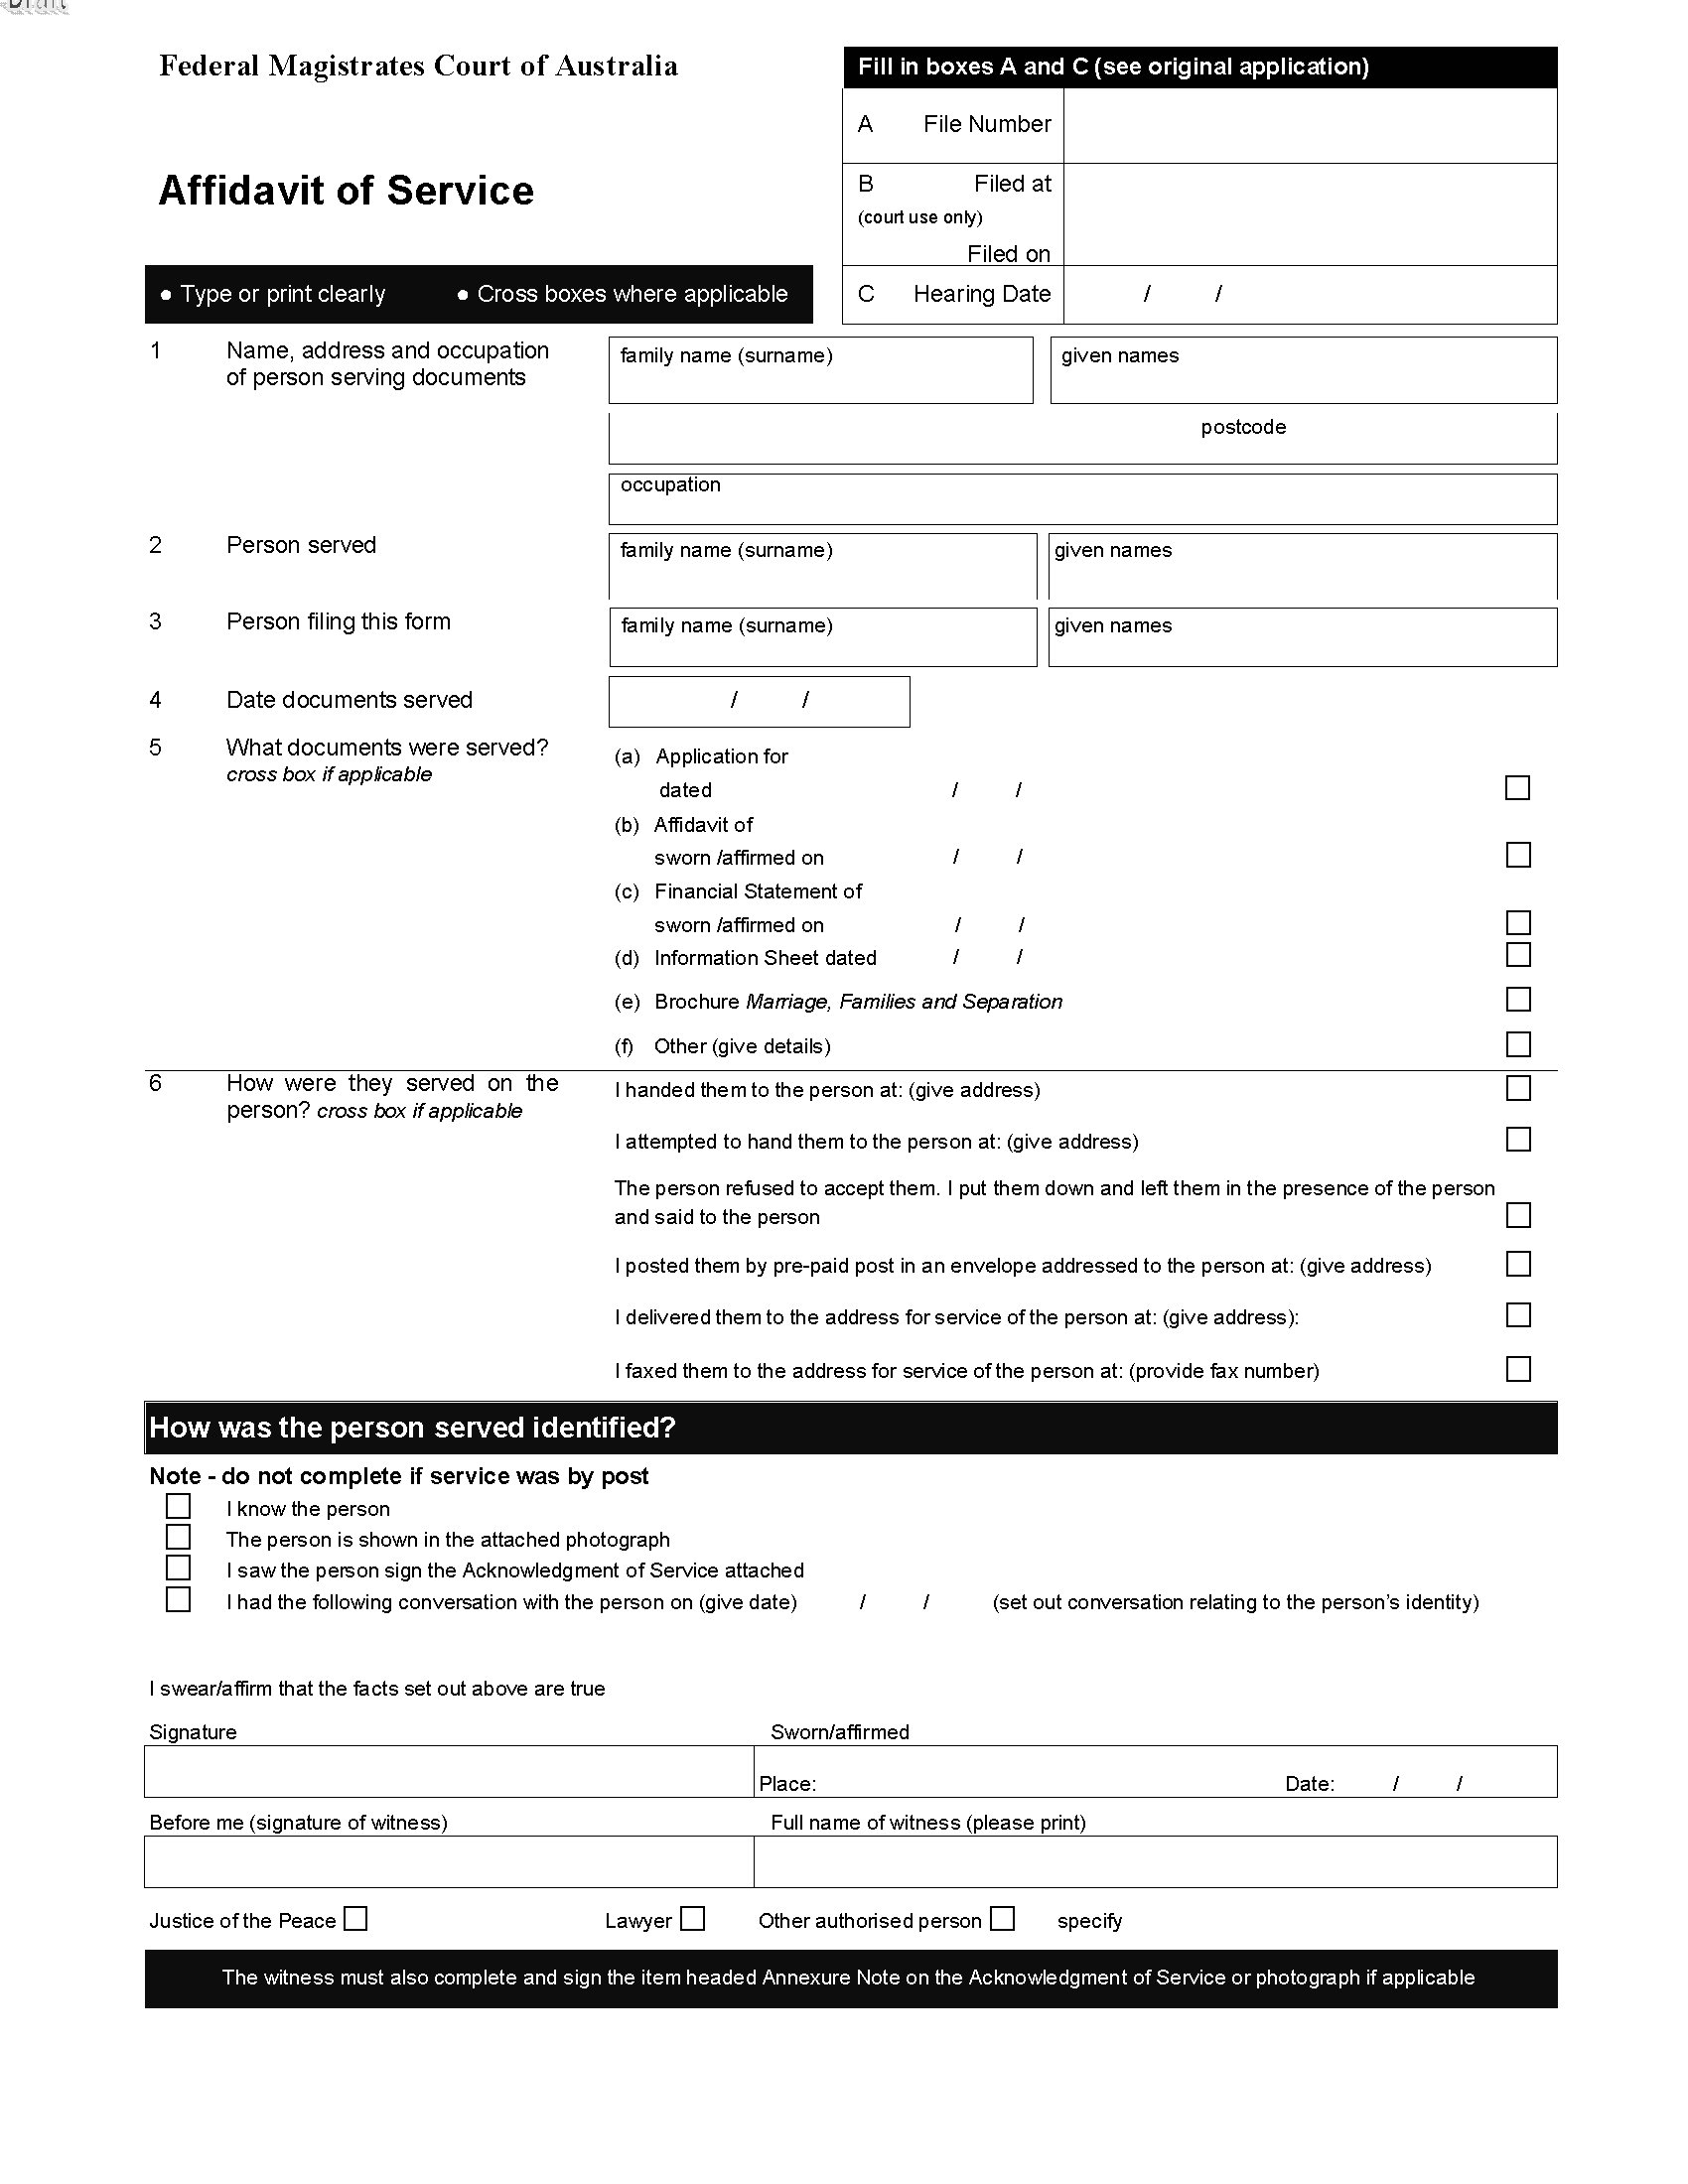 australia-affidavit-of-service-legal-forms-and-business-templates